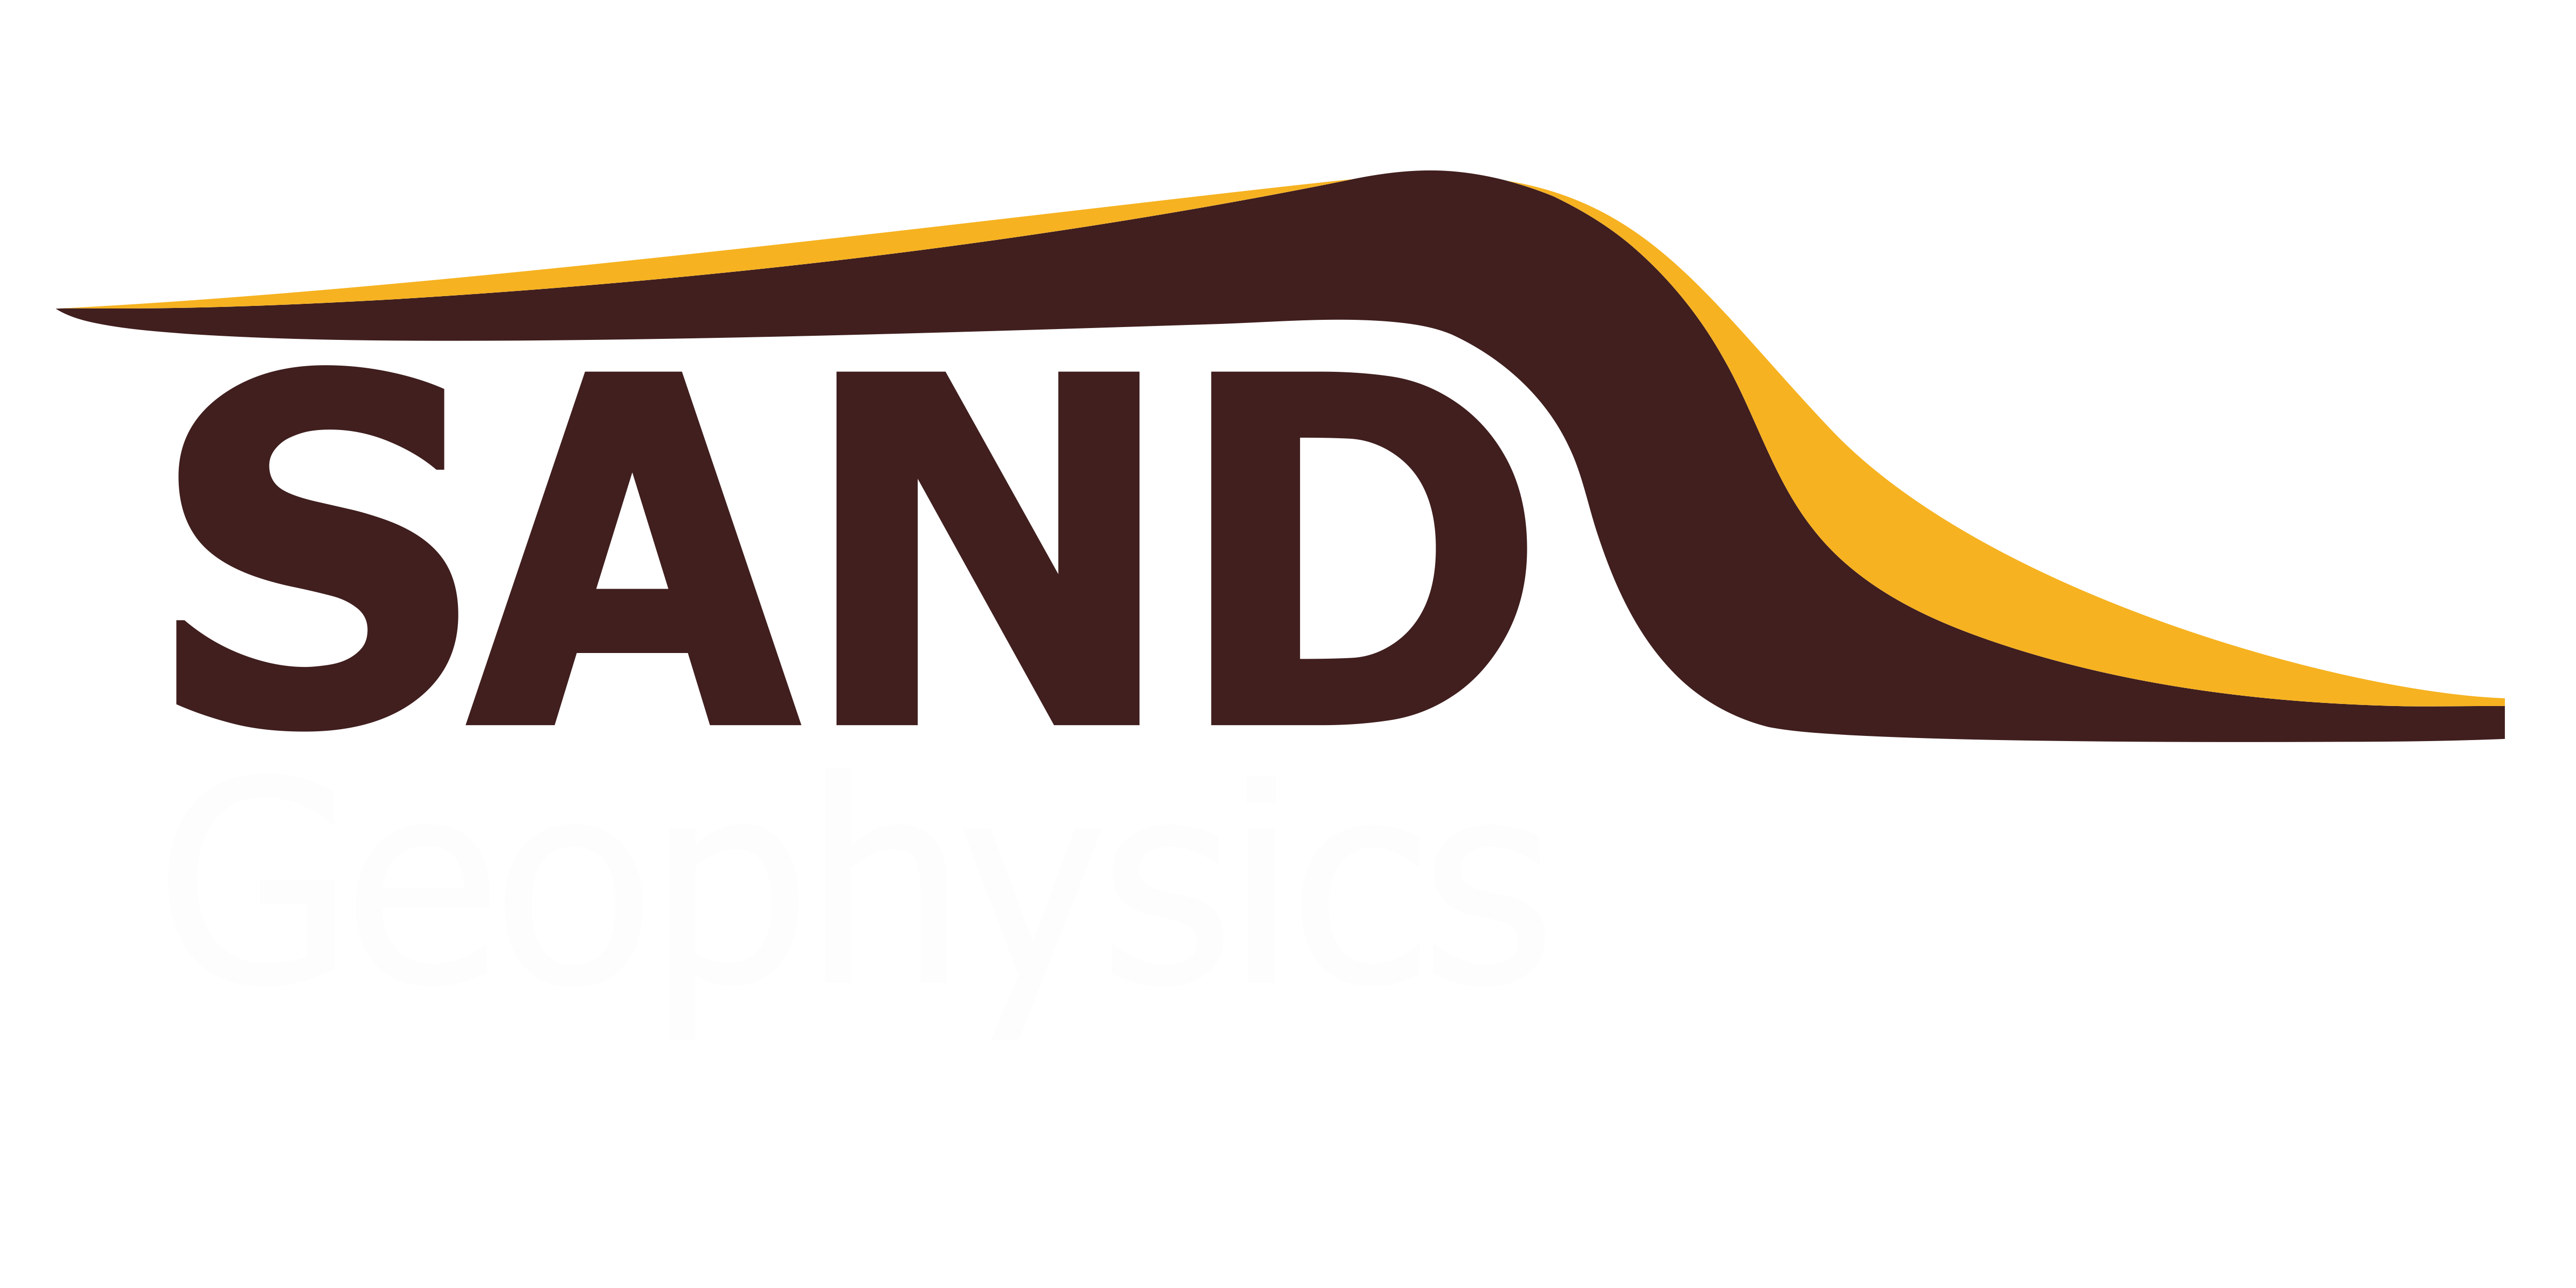 Sand Logo - SAND geophysics - Seabed & Near Surface Detection Specialists